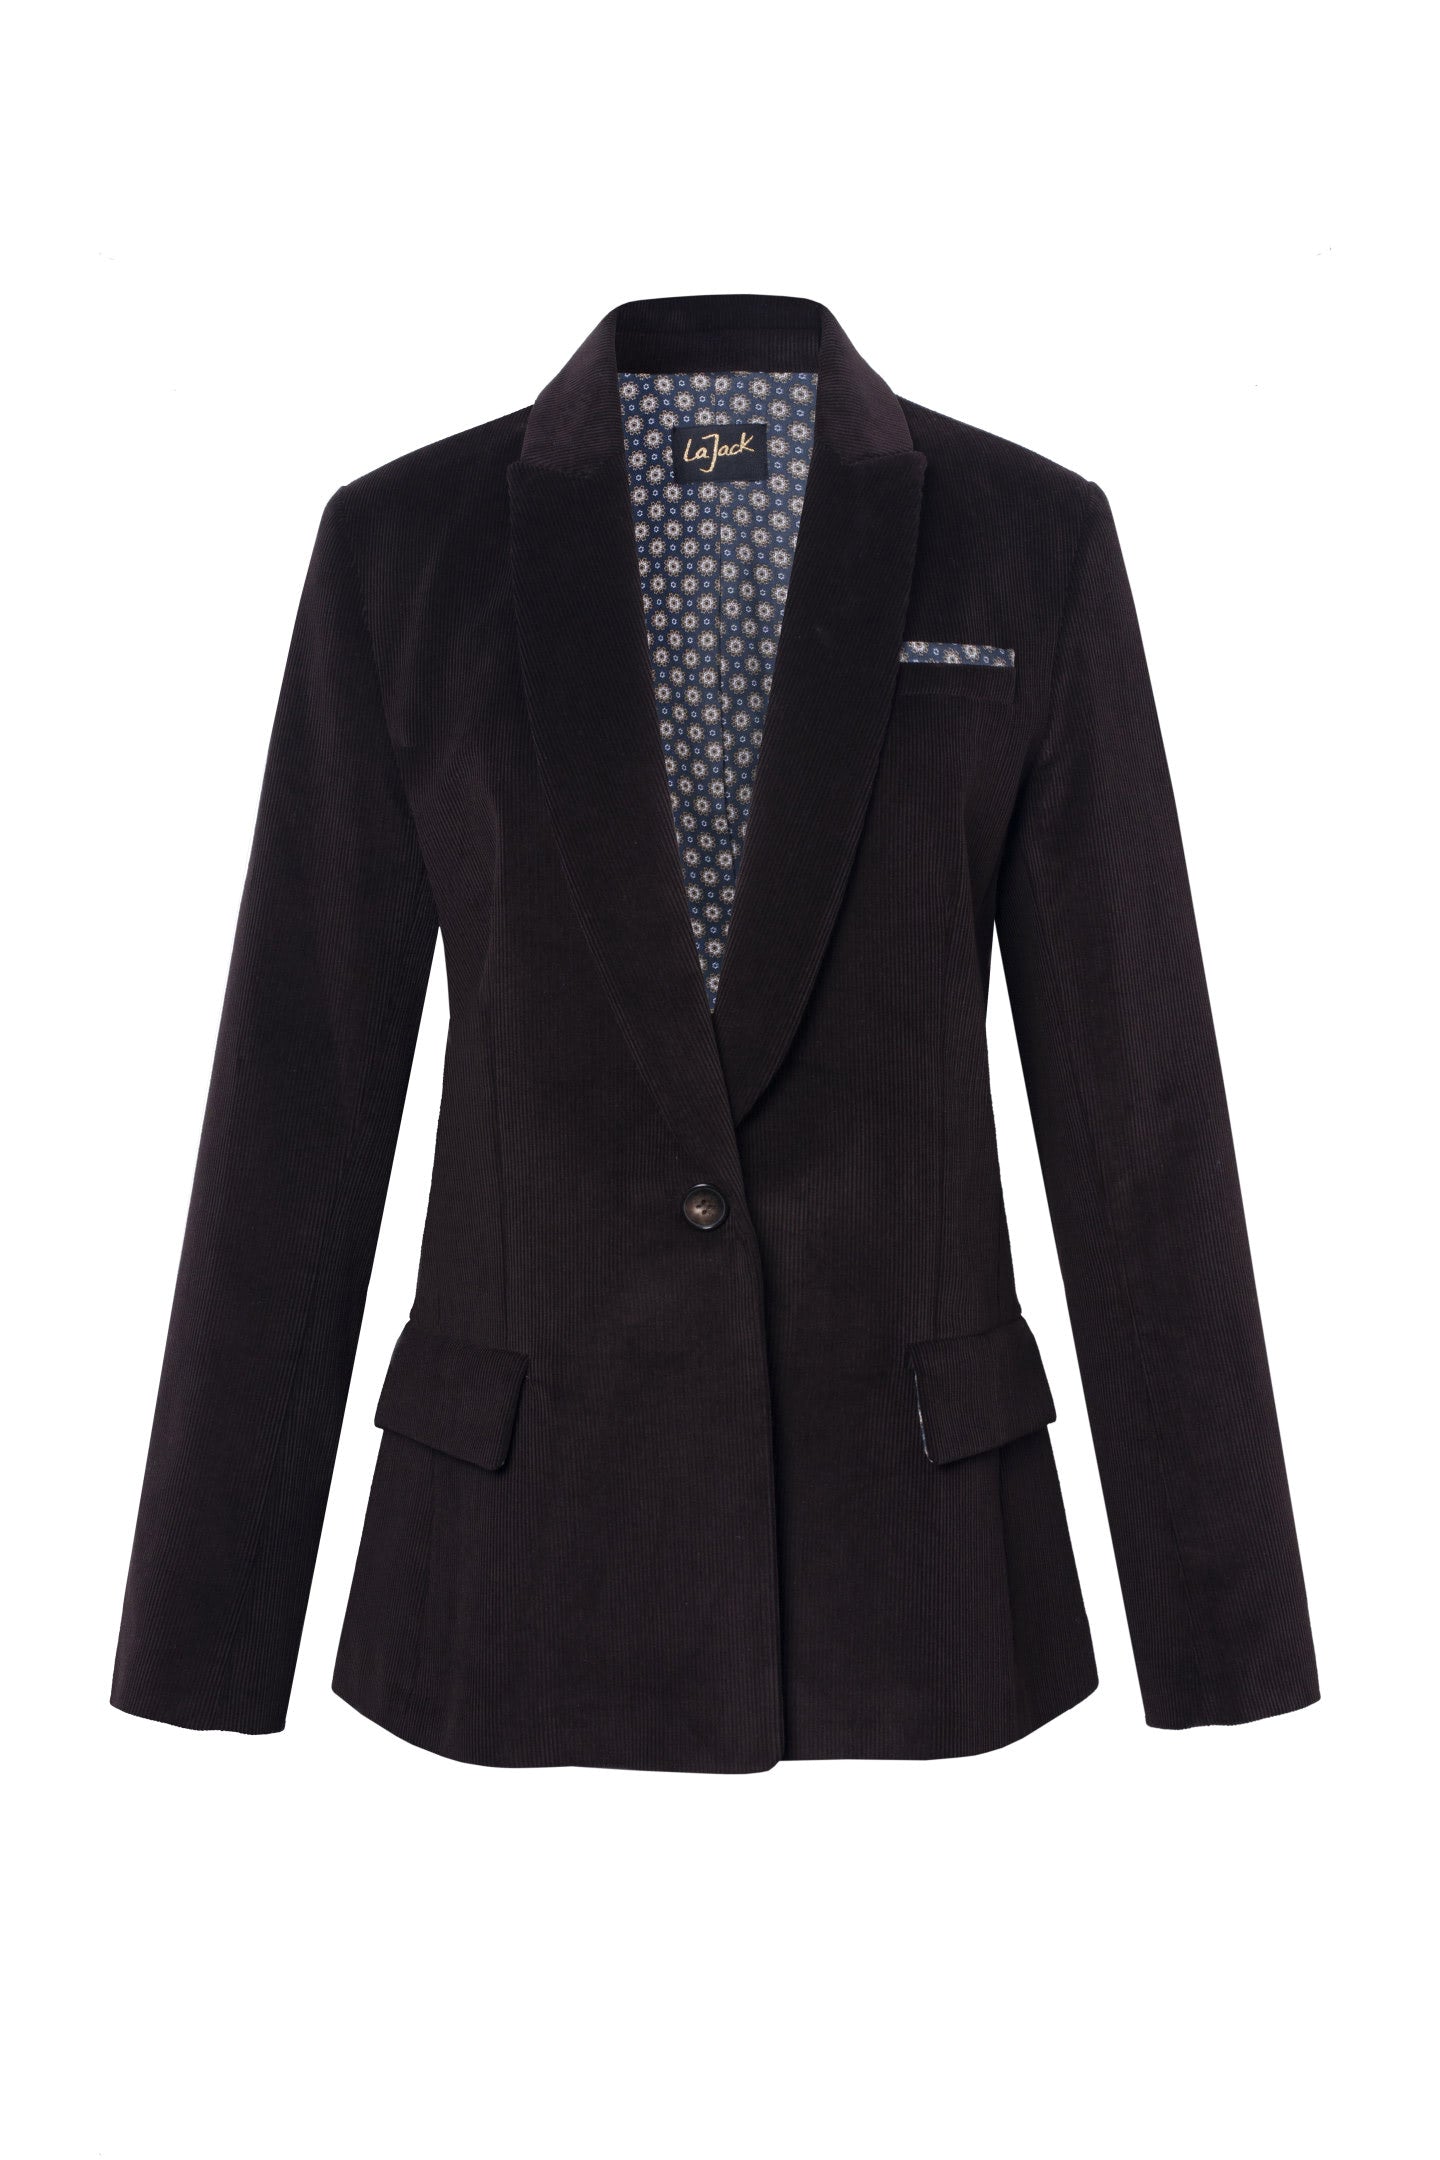 La Gigi - Fitted Brown Corduroy Jacket with Blue Gold Flower Lining 